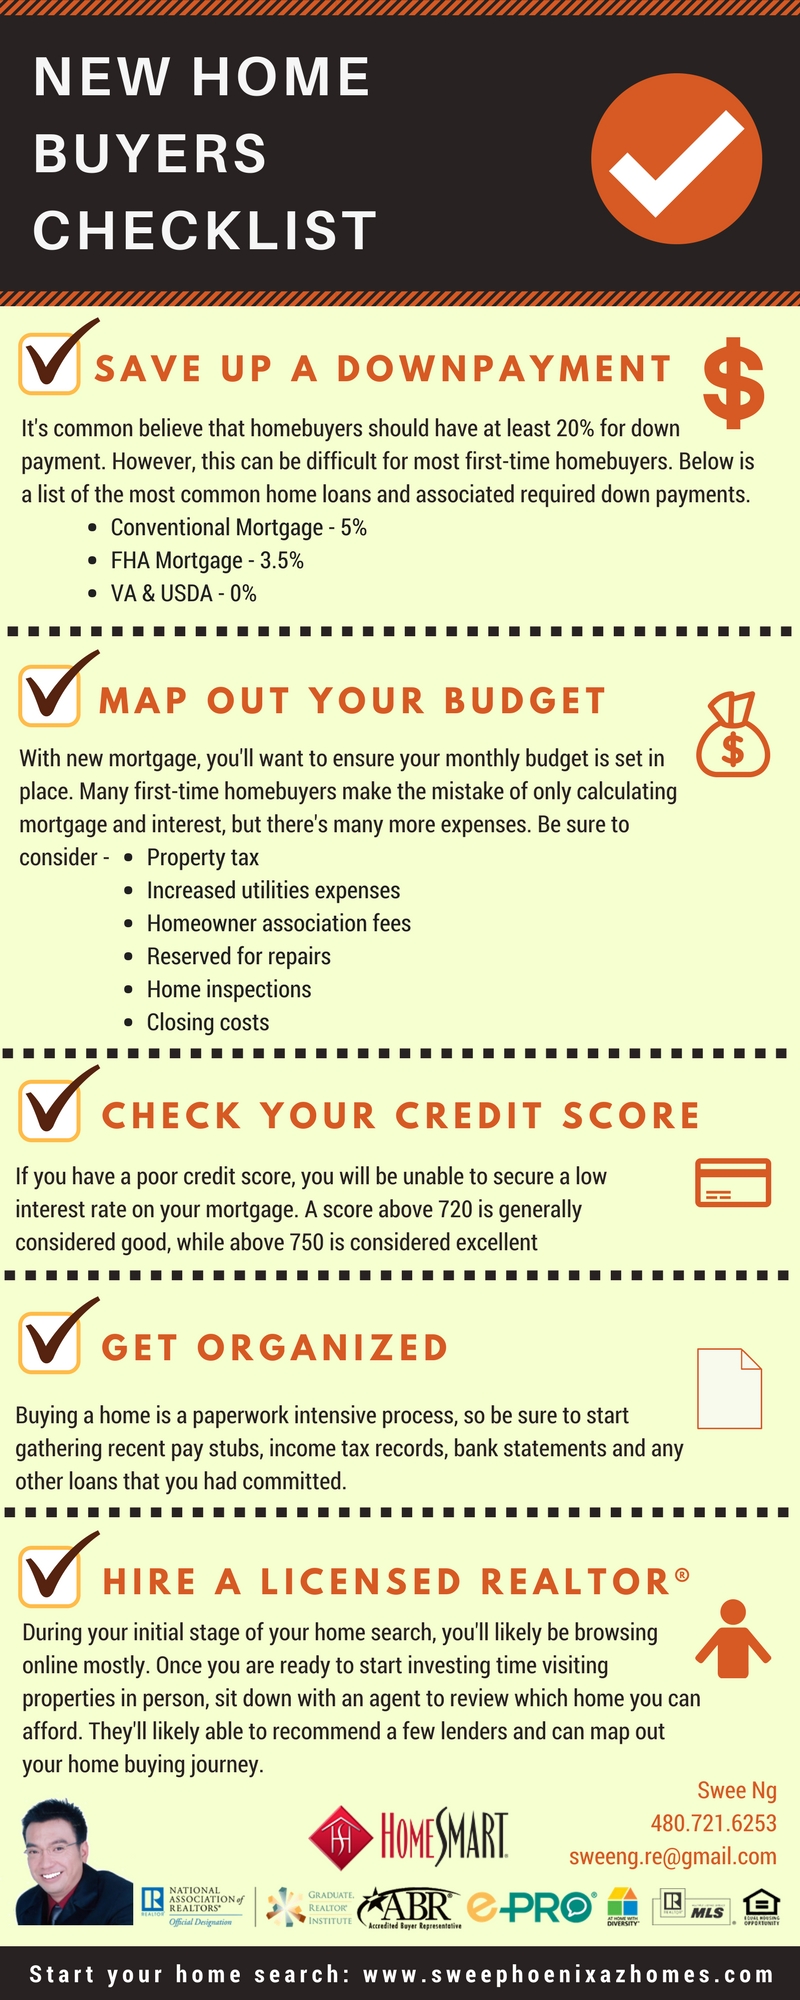 New Home Buyer Checklist - Phoenix AZ Real Estate and ...